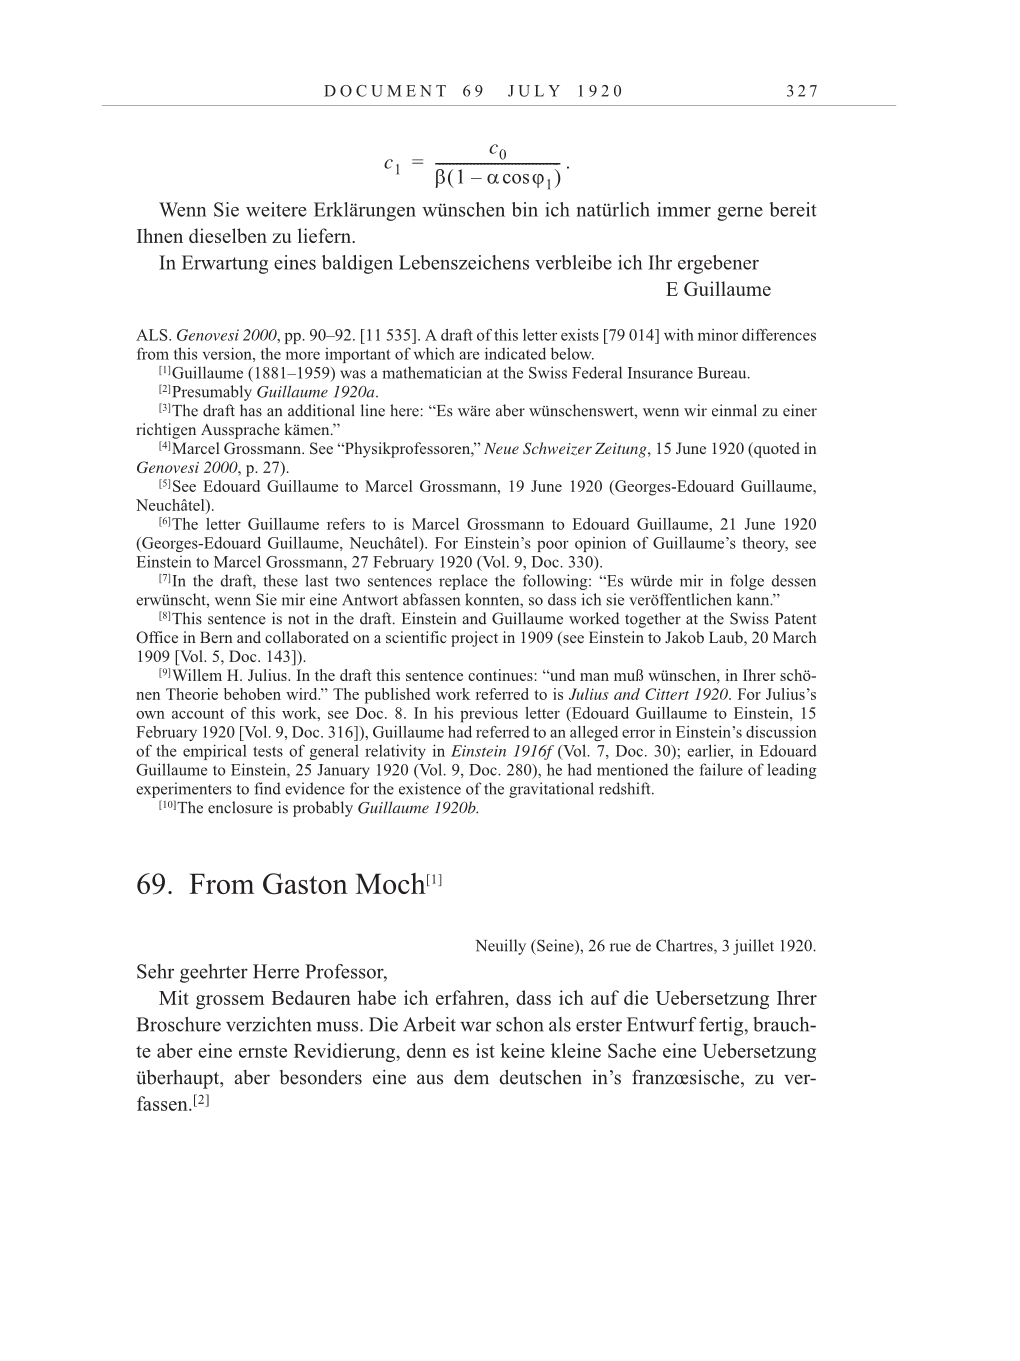 Volume 10: The Berlin Years: Correspondence May-December 1920 / Supplementary Correspondence 1909-1920 page 327